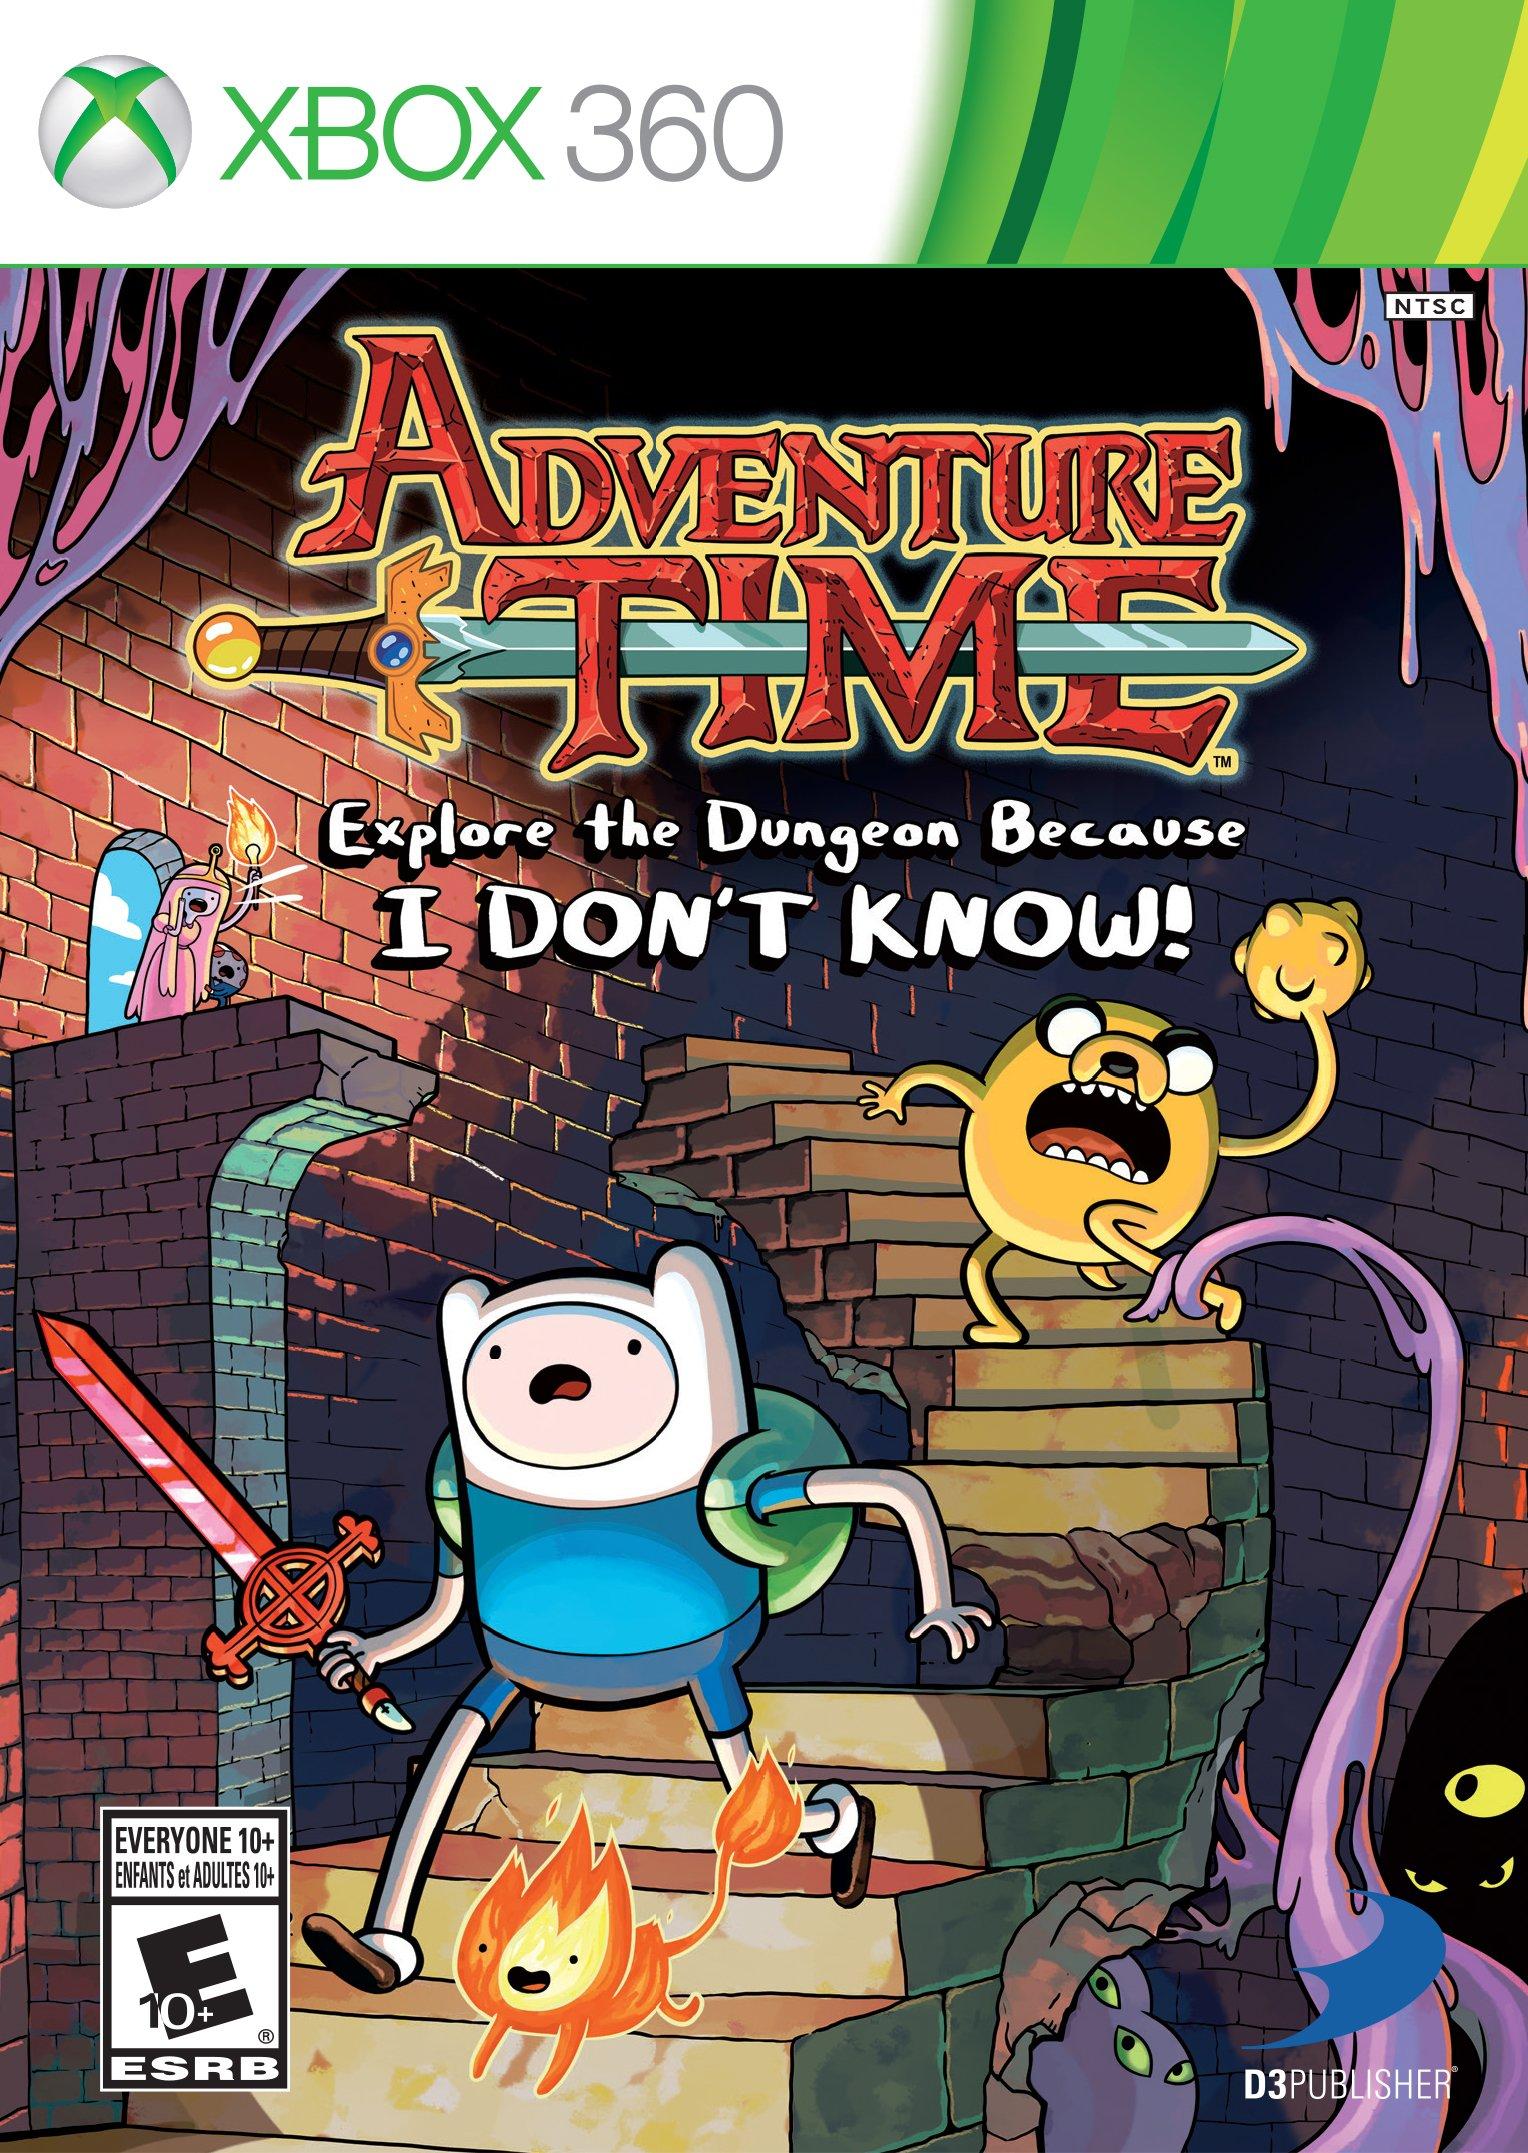 Adventure Time: Explore the Dungeon Because I DON'T KNOW! - Xbox 360